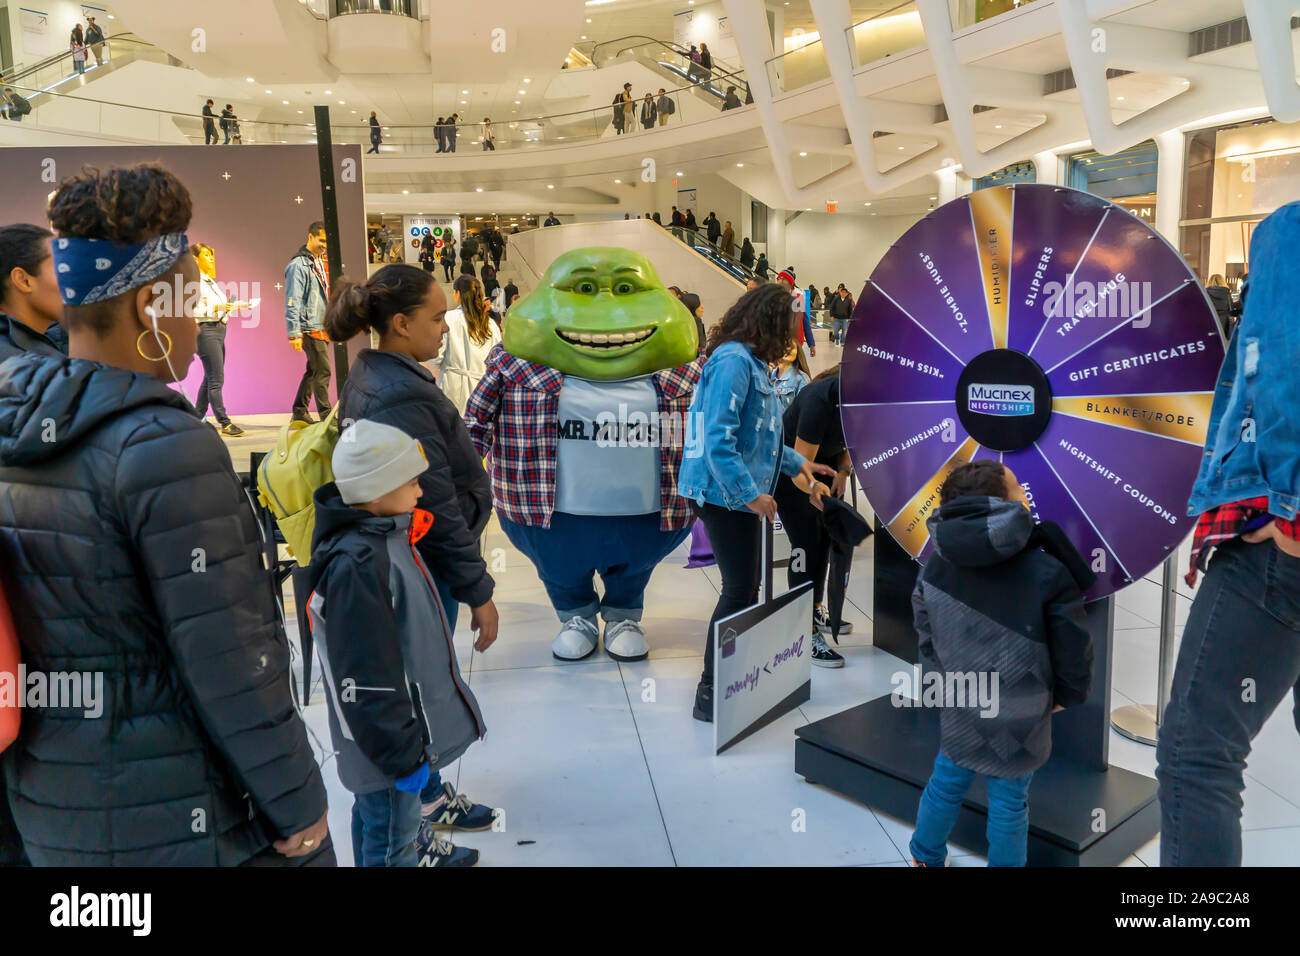 Mr. Mucus, mascot of Reckitt Benckiser’s Muciniex brand cold and cough medicine watches over participants spinning a wheel for prizes at a Mucinex branding event in the WTC Oculus in New York on Tuesday, November 12, 2019. (© Richard B. Levine) Stock Photo